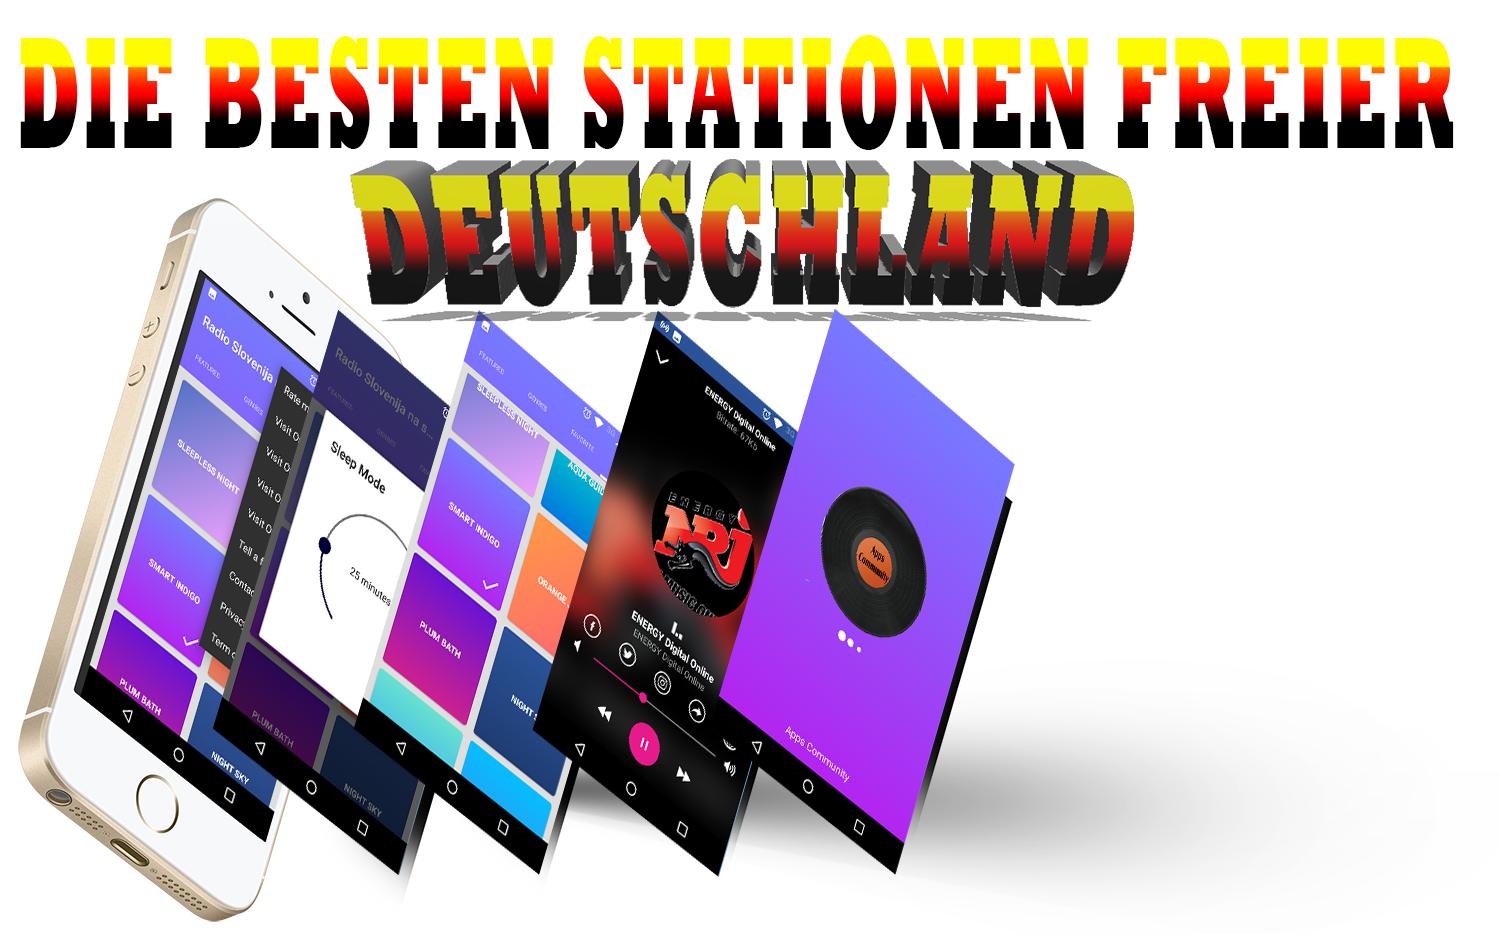 Radio Trausnitz Online for Android - APK Download